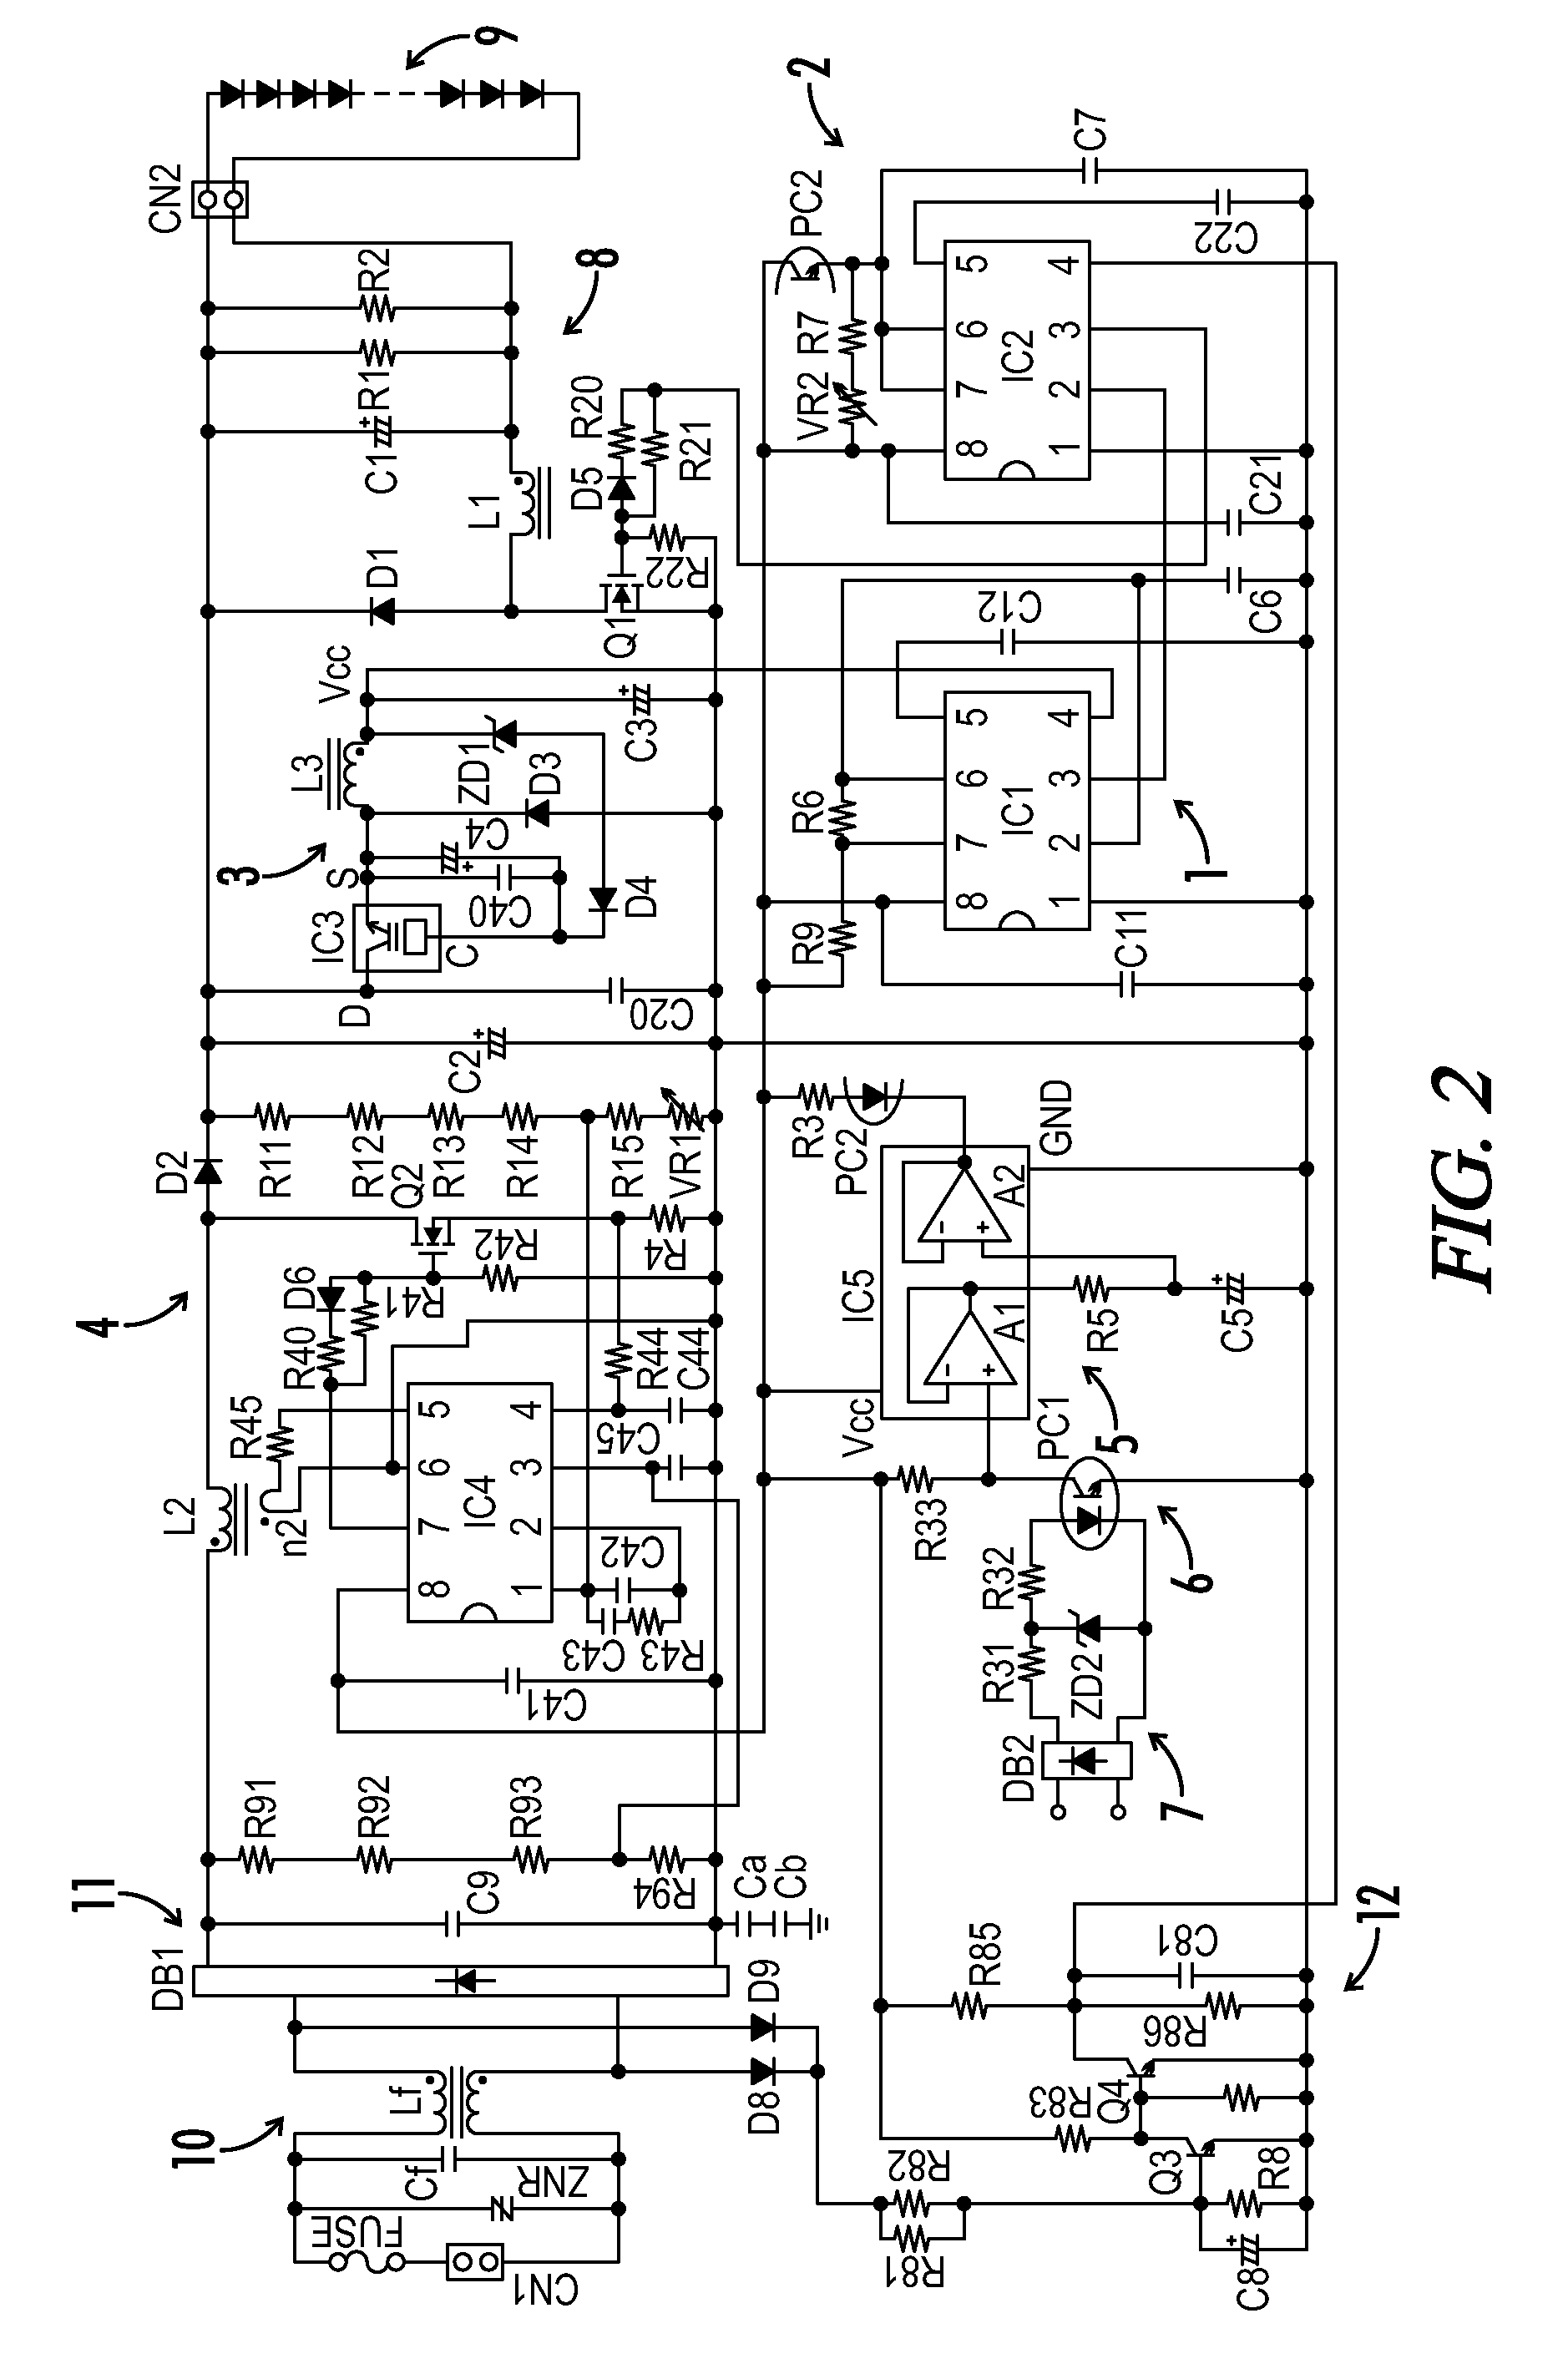 LED lighting device with output impedance control